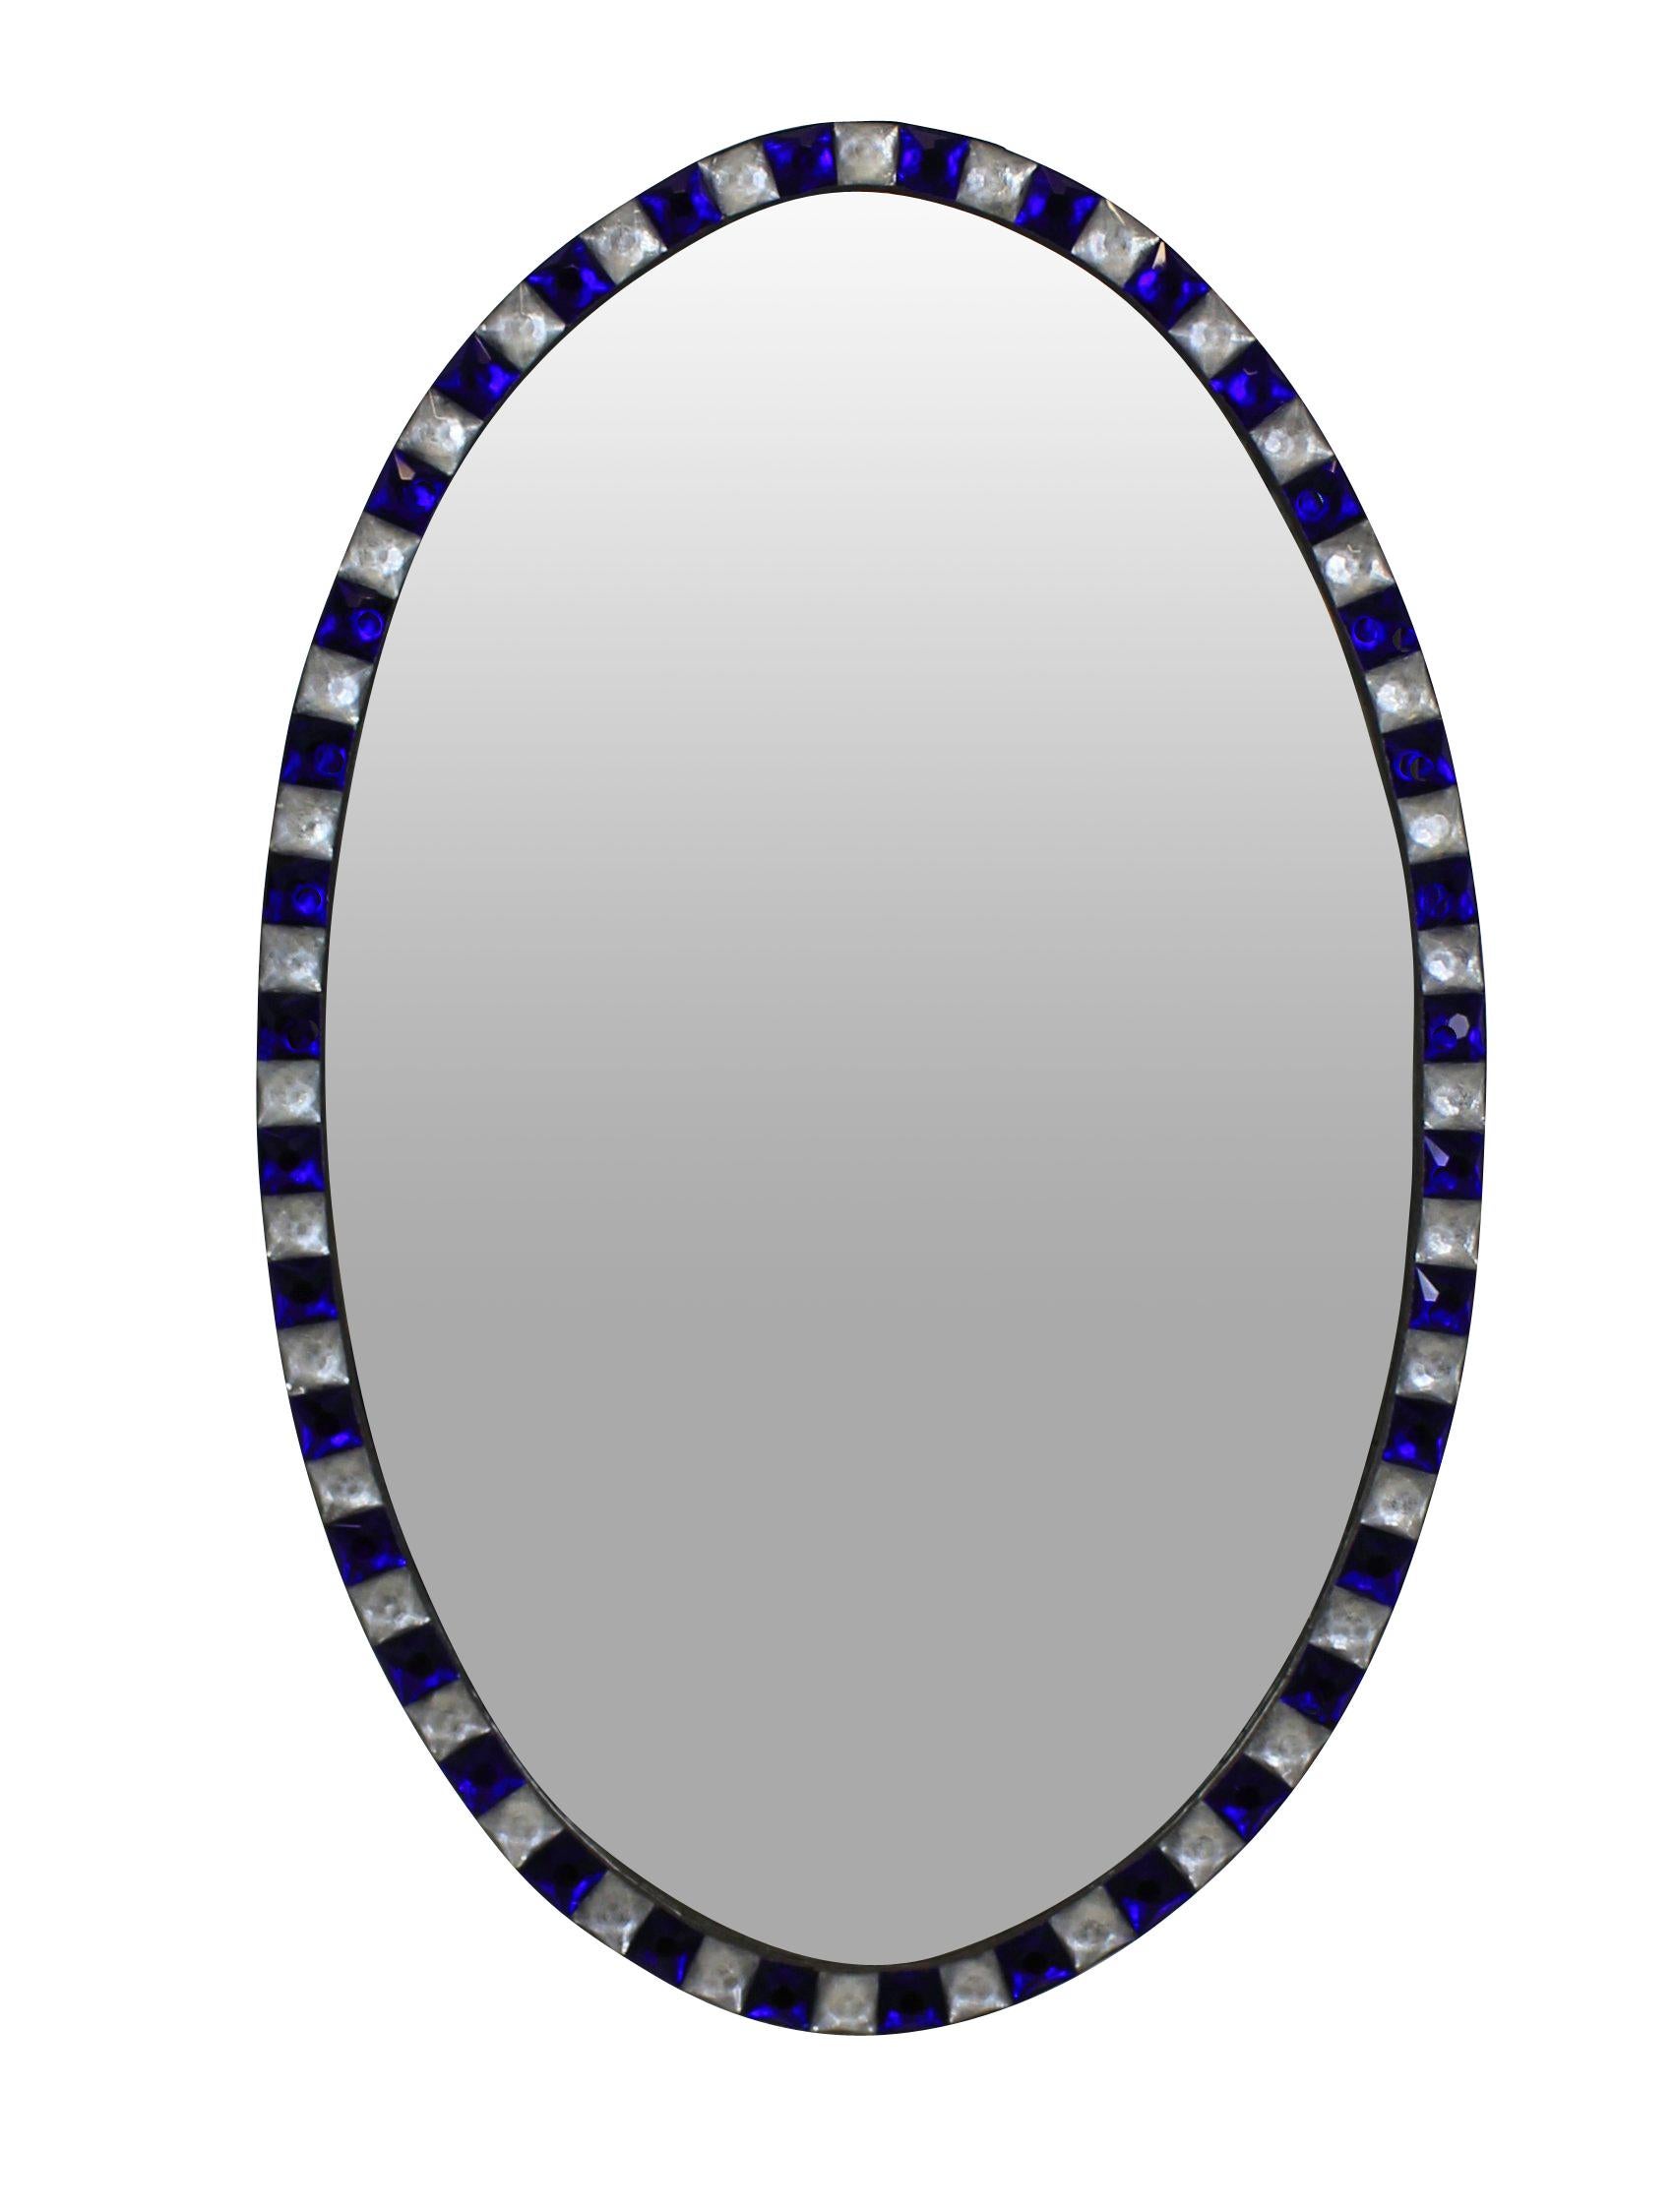 Pair of Stunning Irish Mirrors with Faceted Rock Crystal and Blu Glass Borders 1